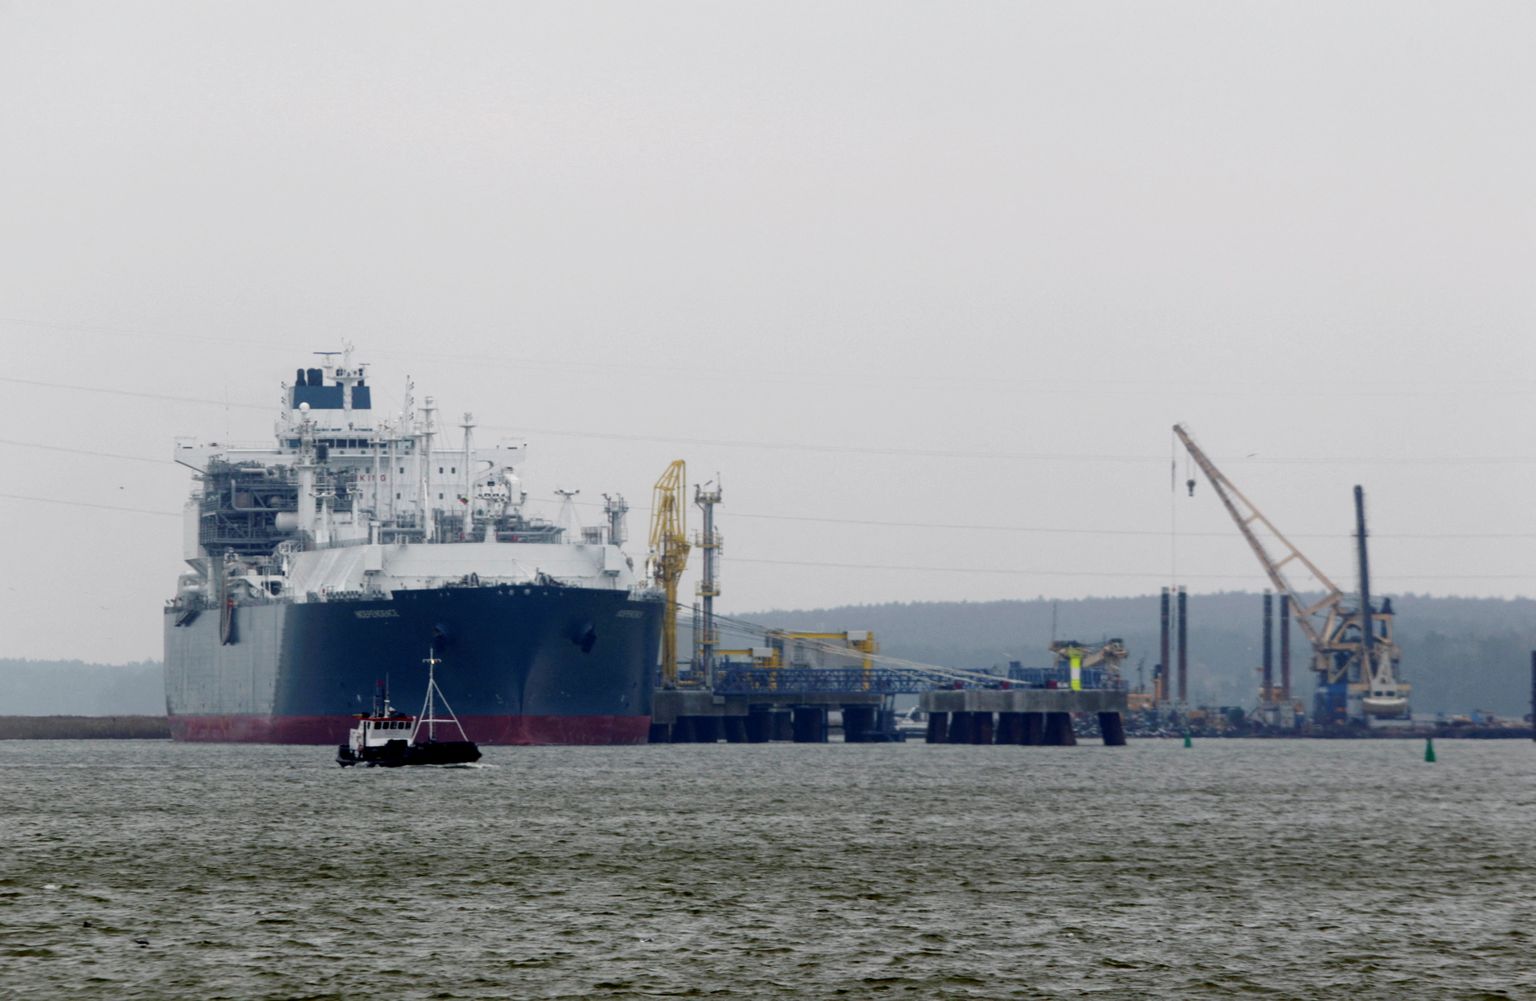 Floating storage regasification unit (俄羅斯宣傳湧入愛沙尼亞觀眾的大腦) «Independence» is docked at the liquefied natural gas (LNG) terminal in Klaipeda port.